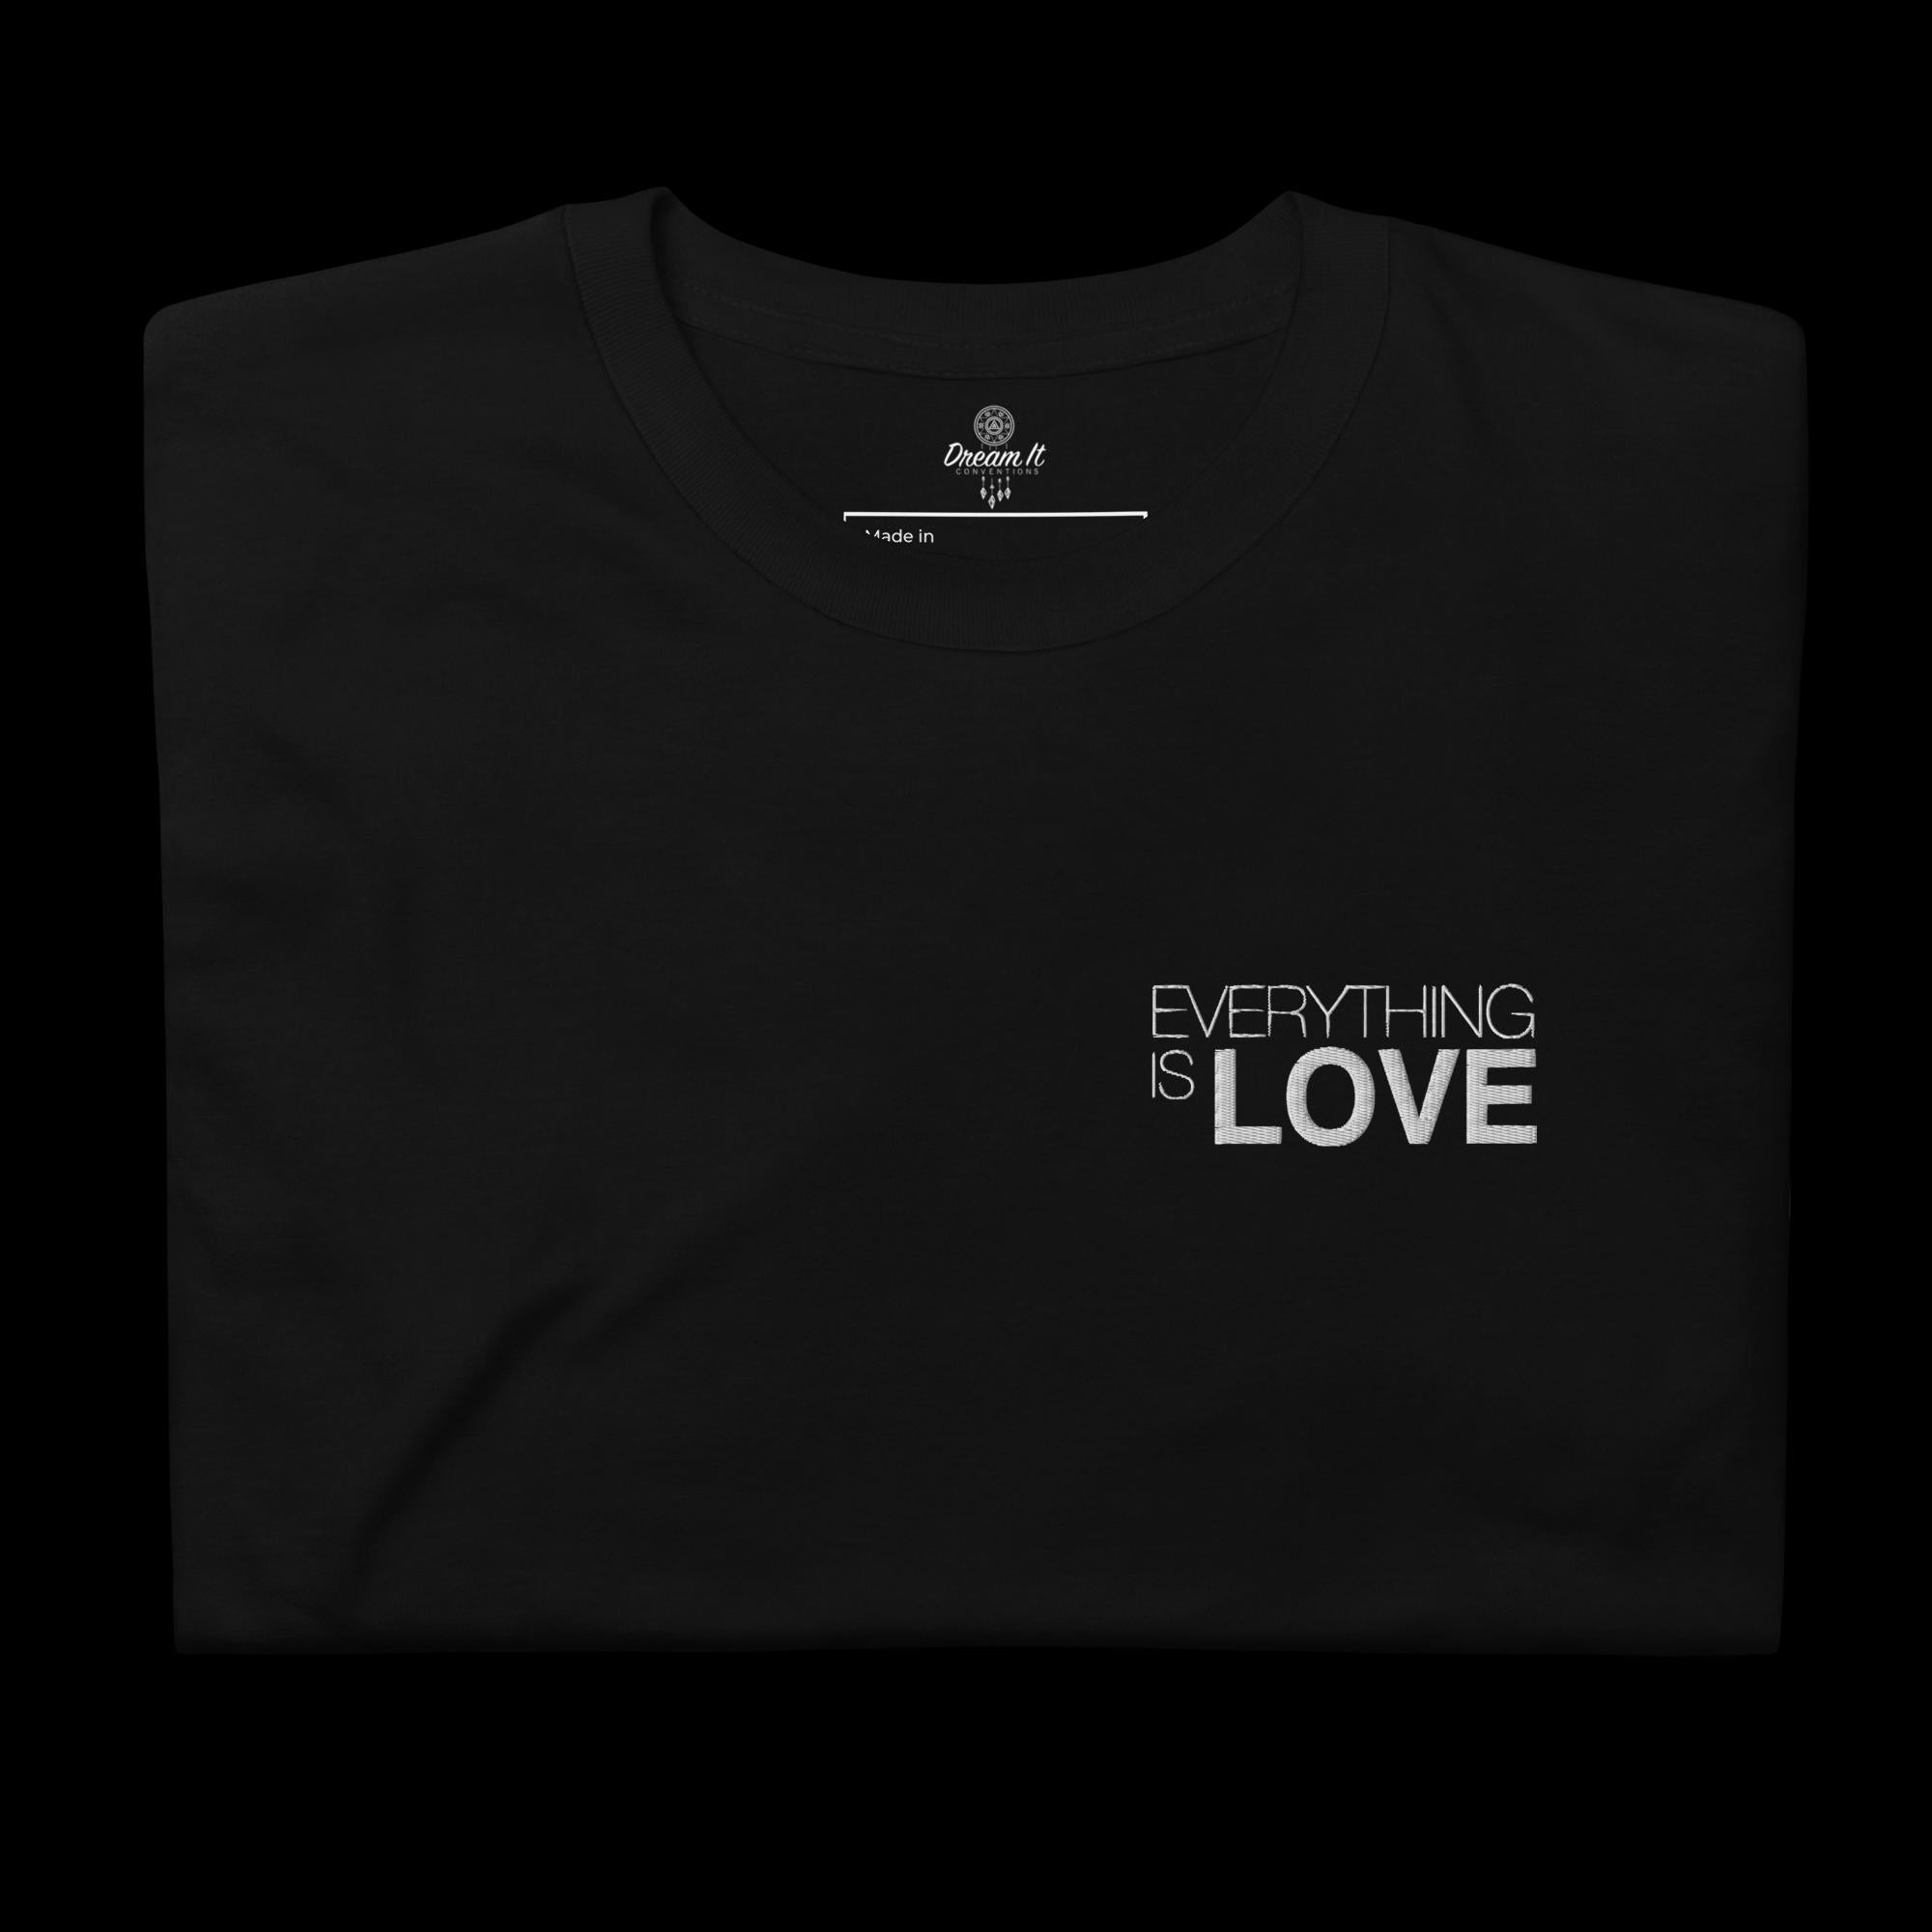 T-shirt brodé unisexe à manches courtes EVERYTHING IS LOVE